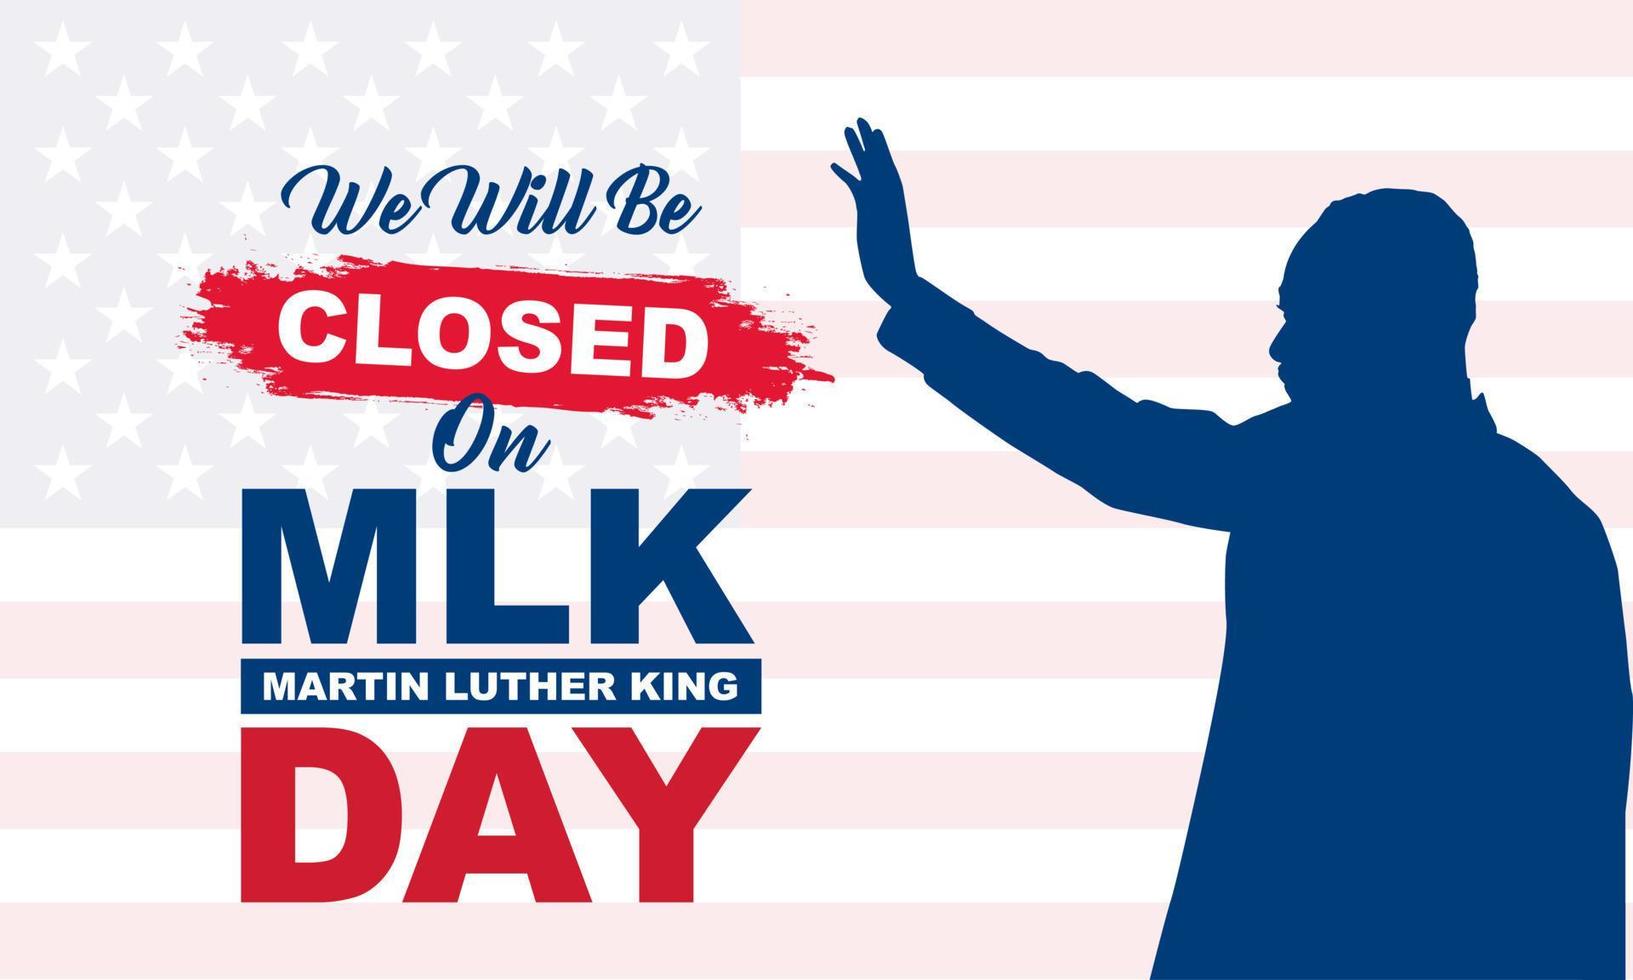 Martin Luther King Jr. Day Background. We will be Closed on MLK Day